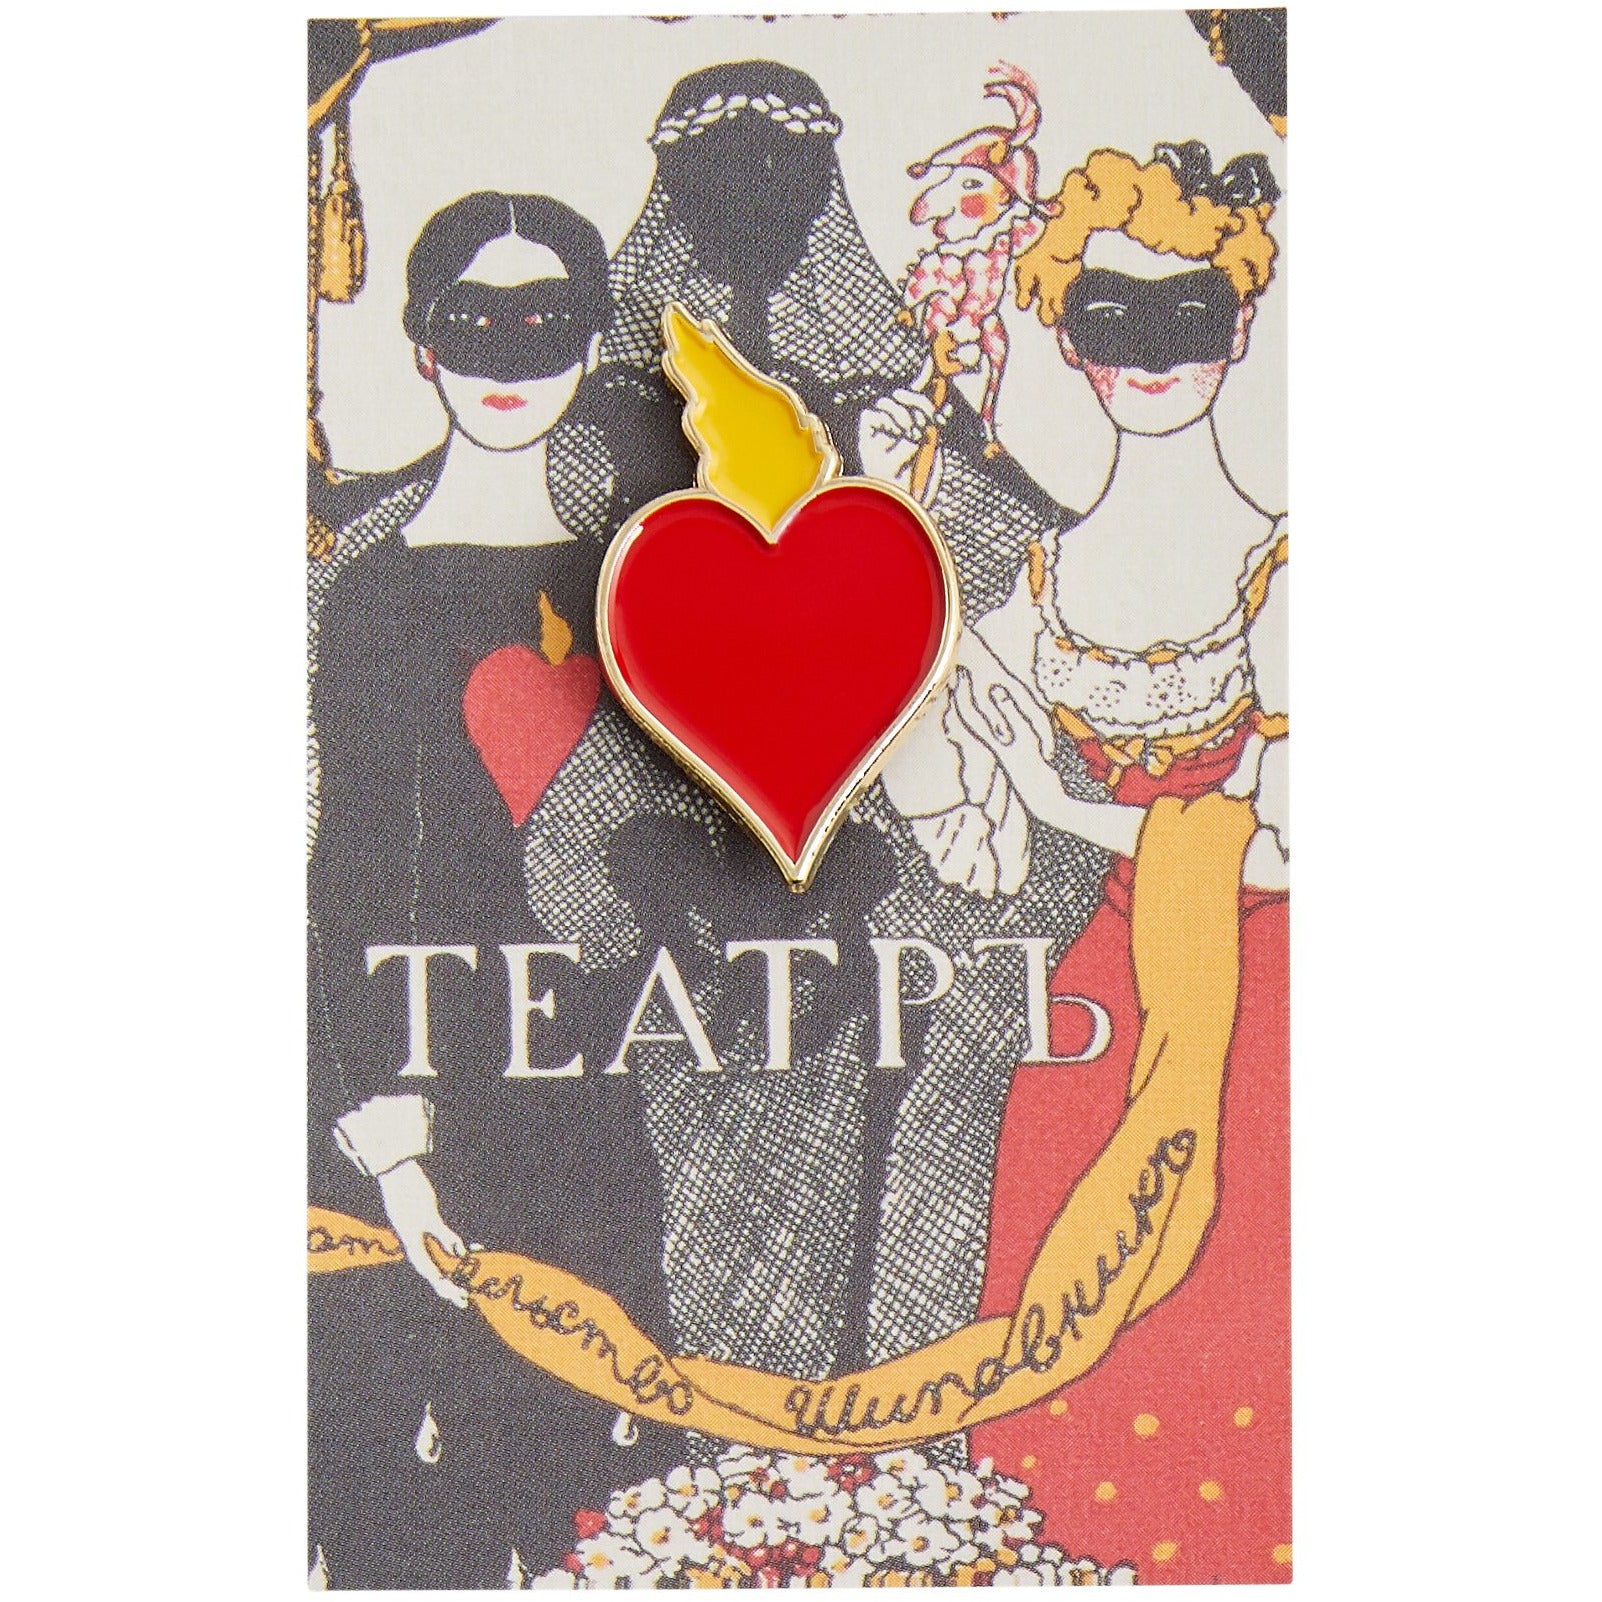 Flaming heart enamel pin badge with backing card design from Illustration for Theatre by Konstantin Somov. From the collection of Cambridge University Library, brought to you by CuratingCambridge.com